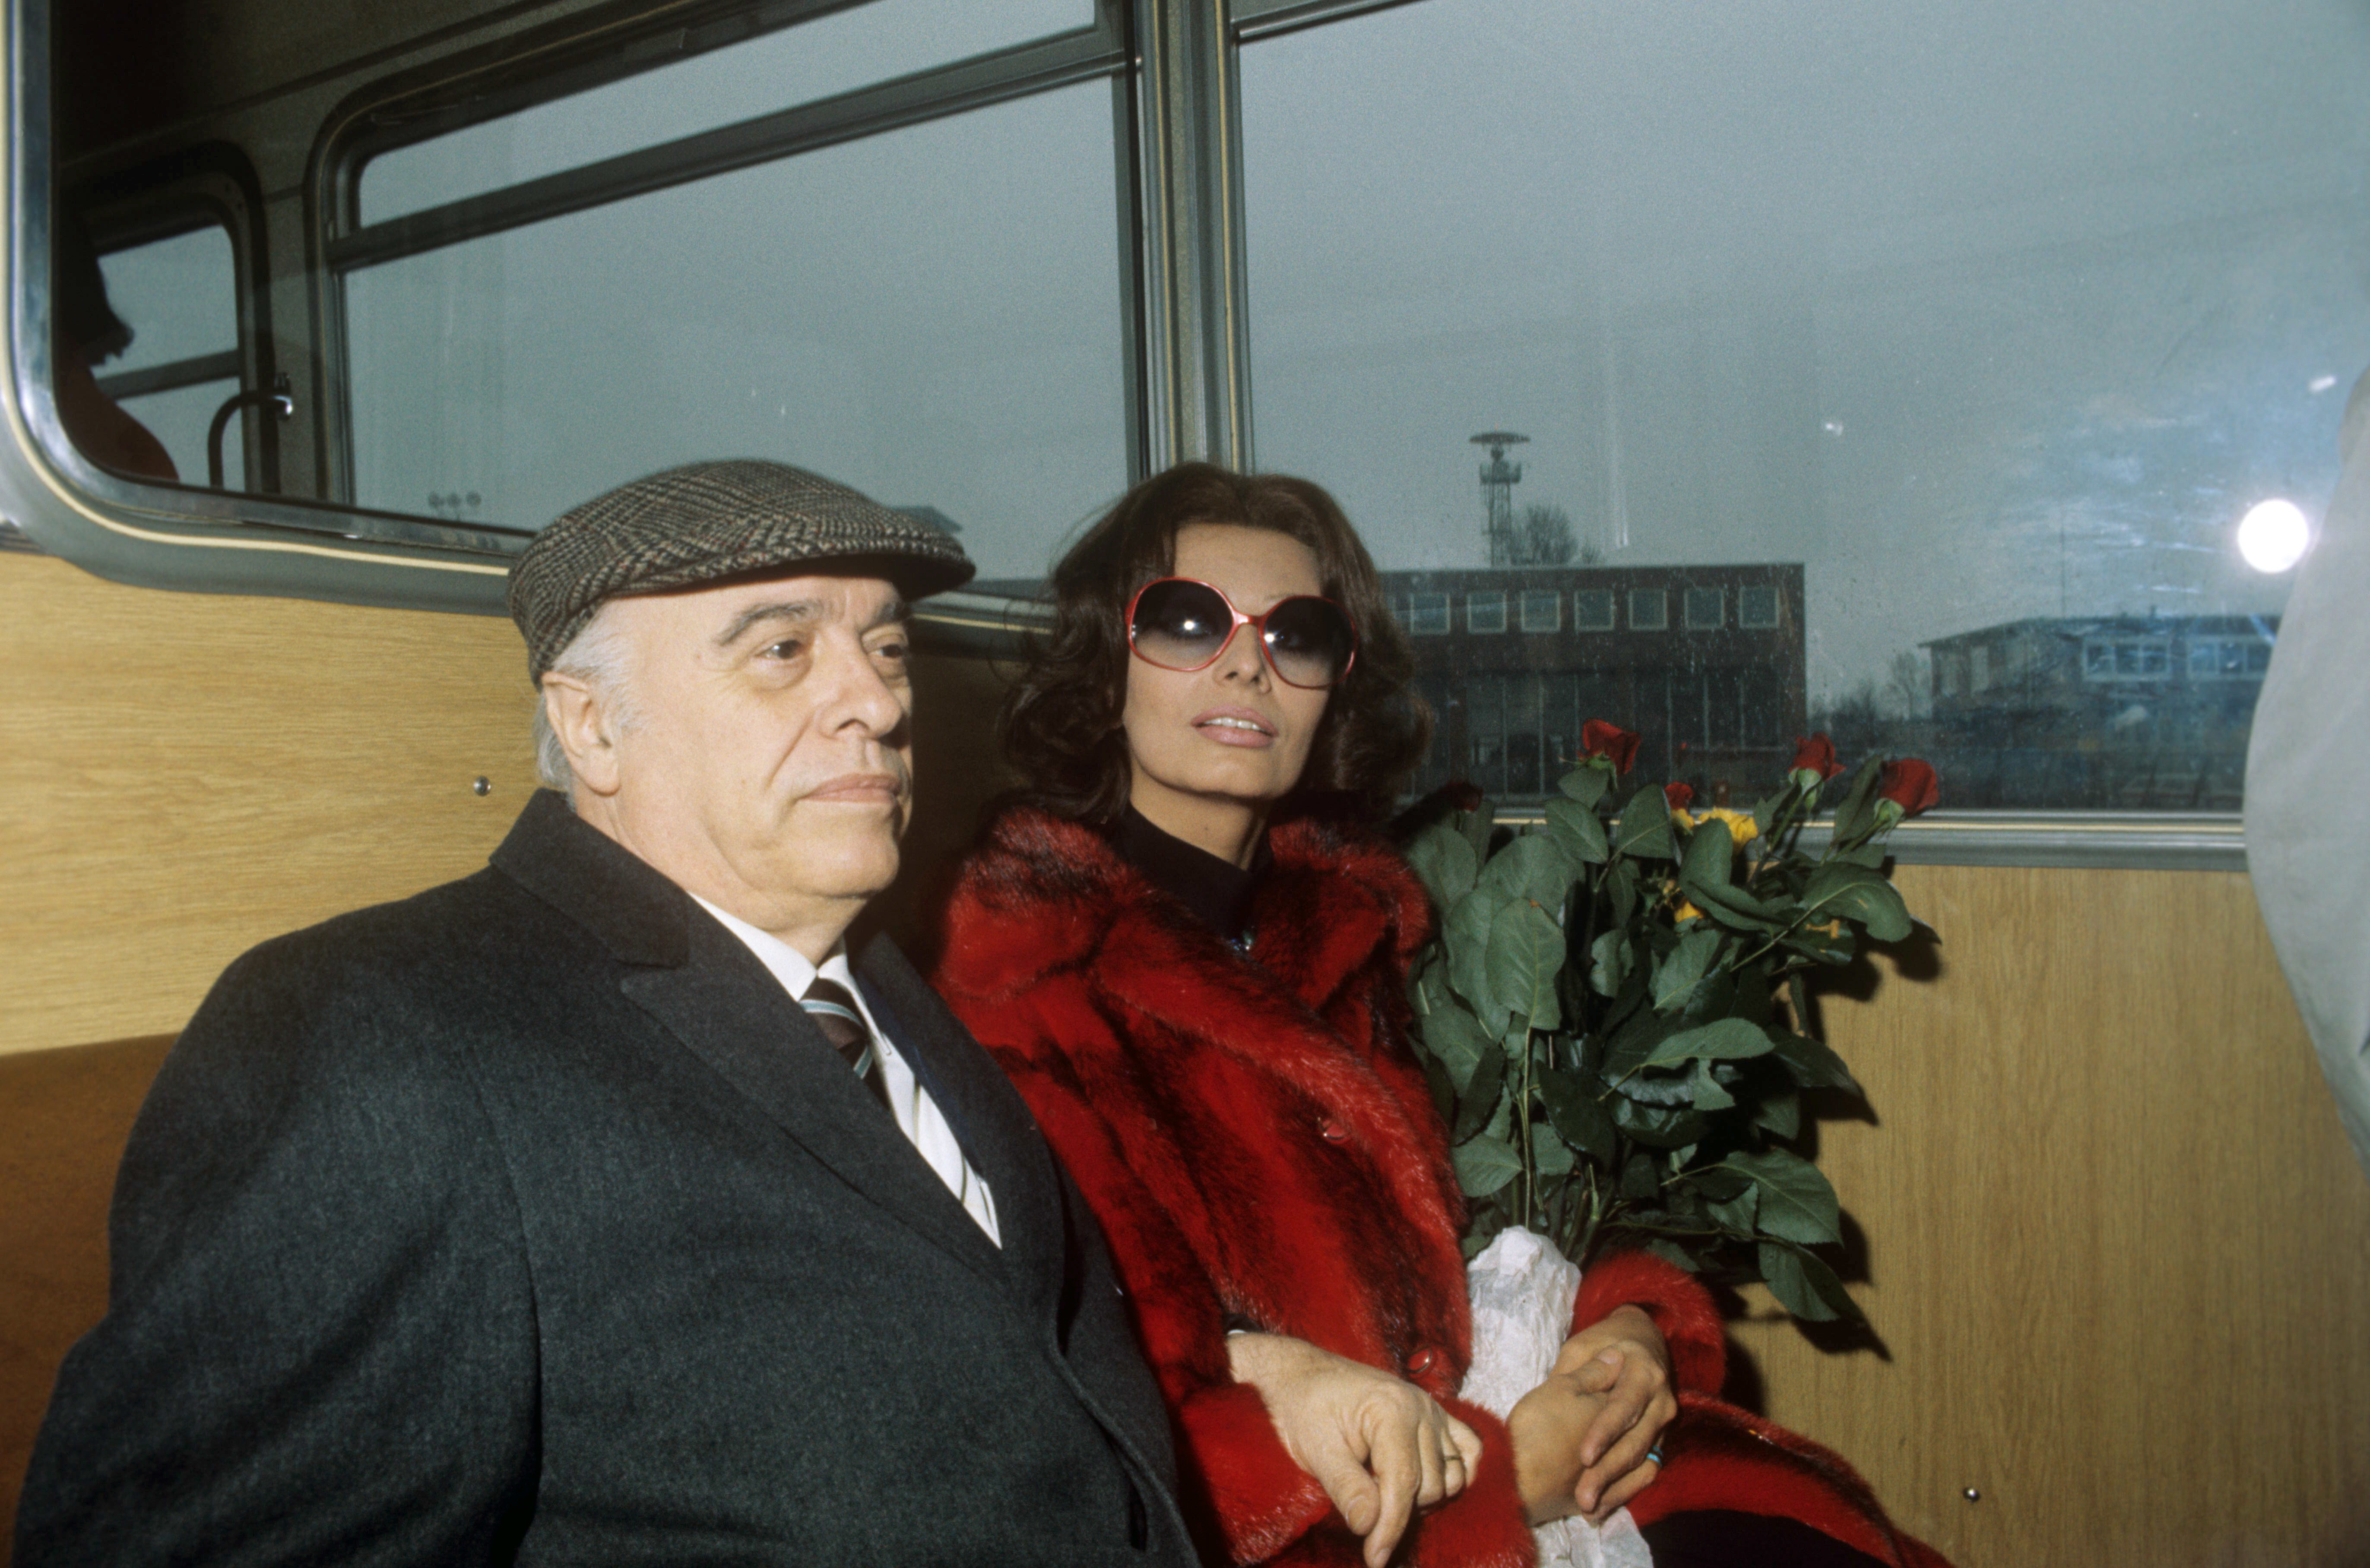 Sophia Loren and Carlo Ponti arrive in Hamburg, Germany on April 16, 1975. | Source: Getty Images